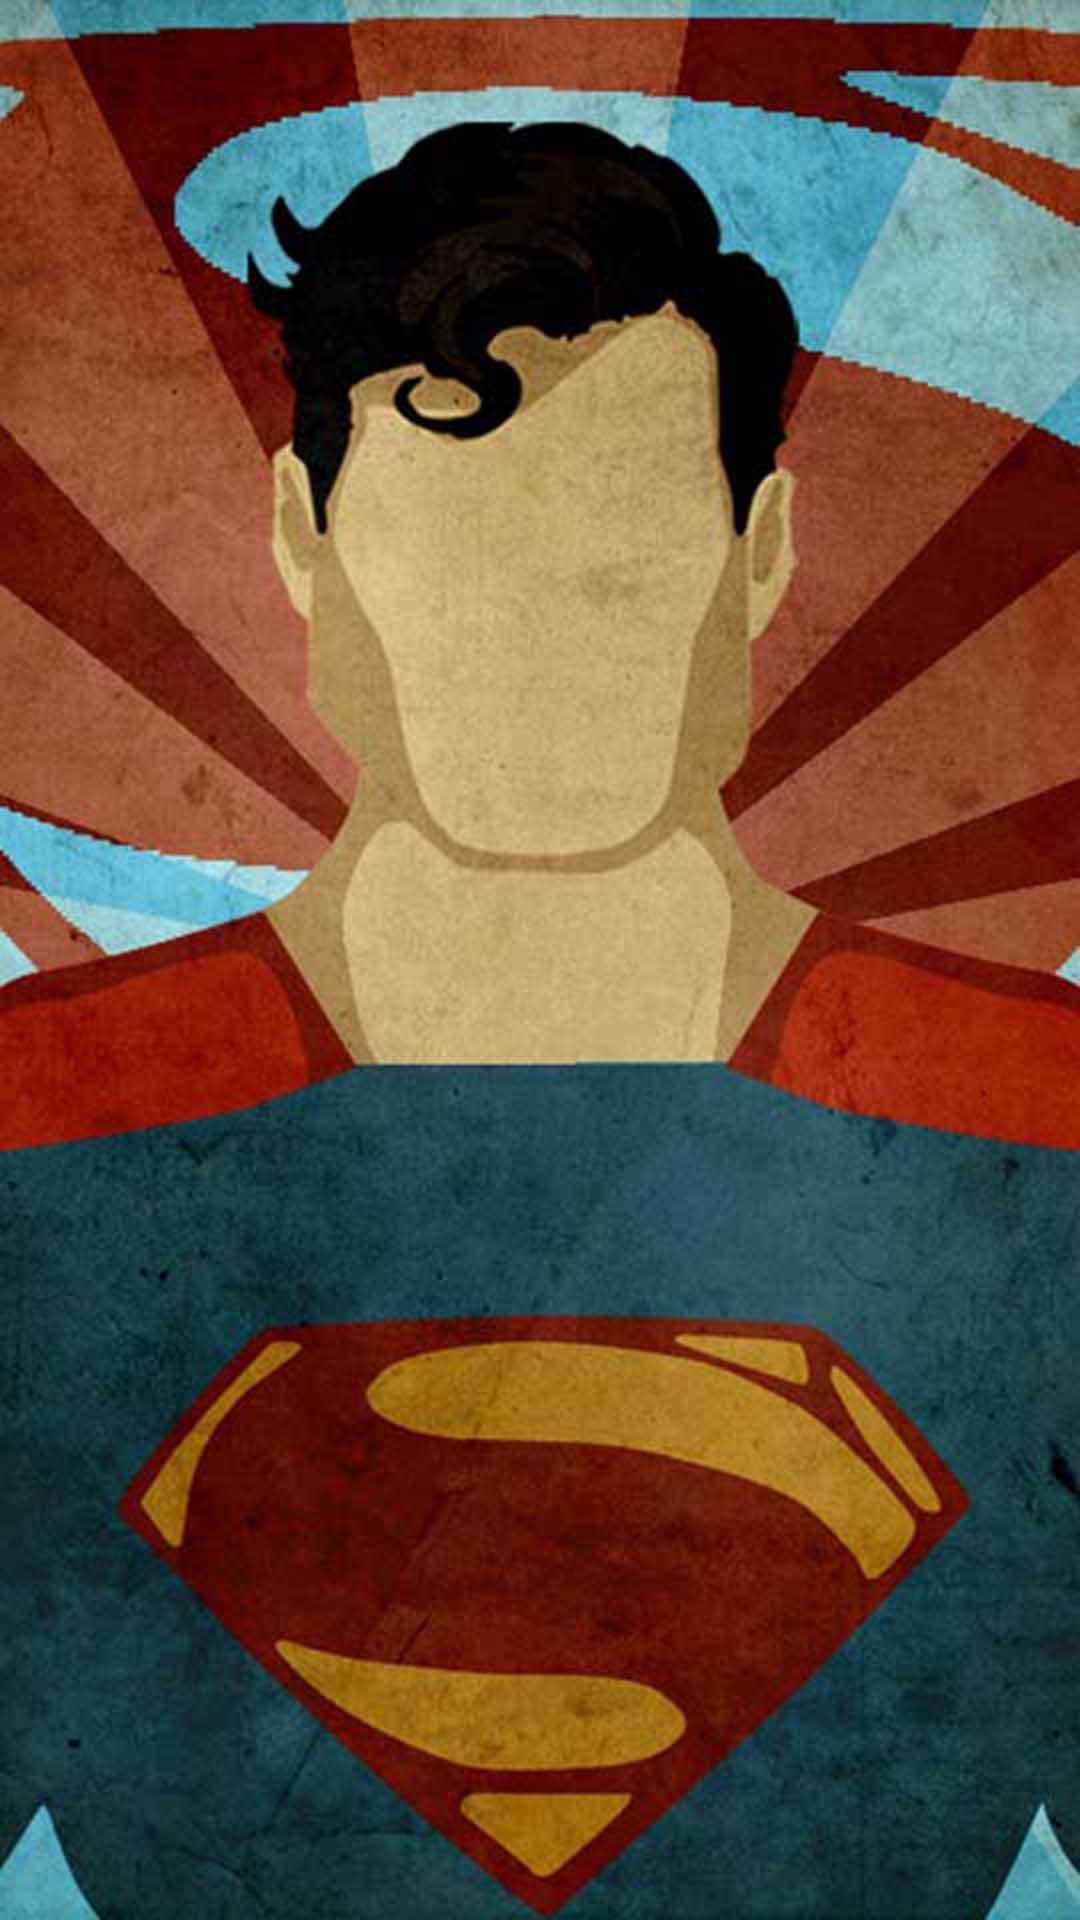 Superman Phone Wallpaper 77 Pictures